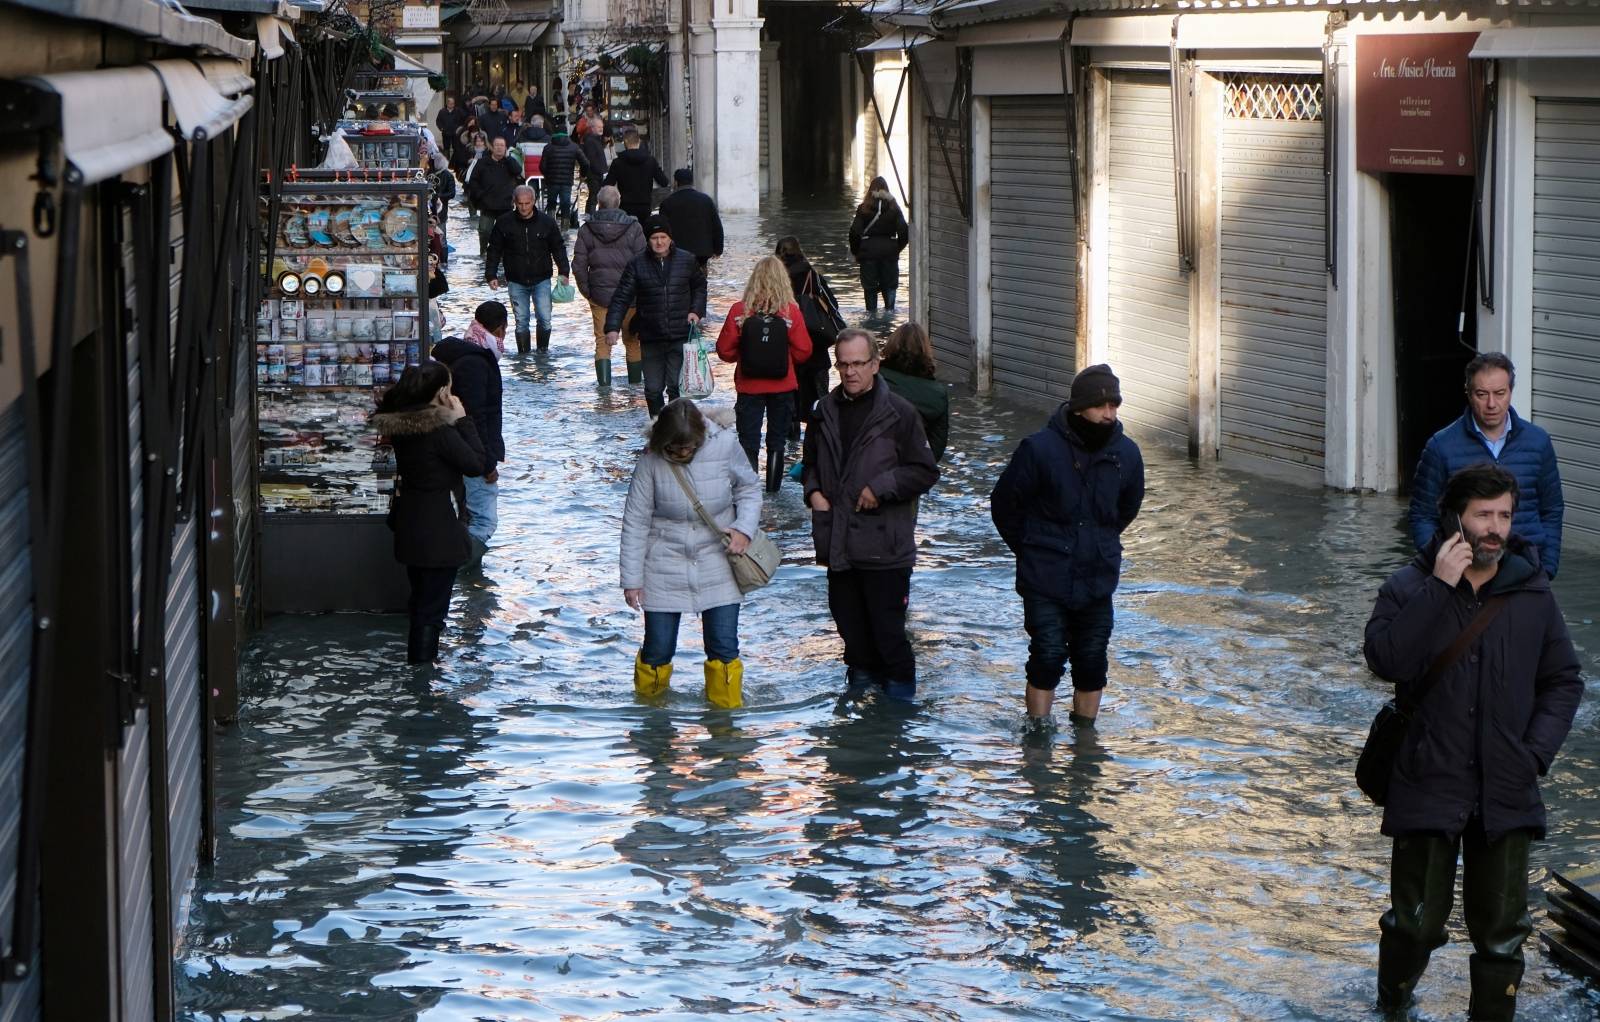 People walk through a flooded street during high tide in Venice